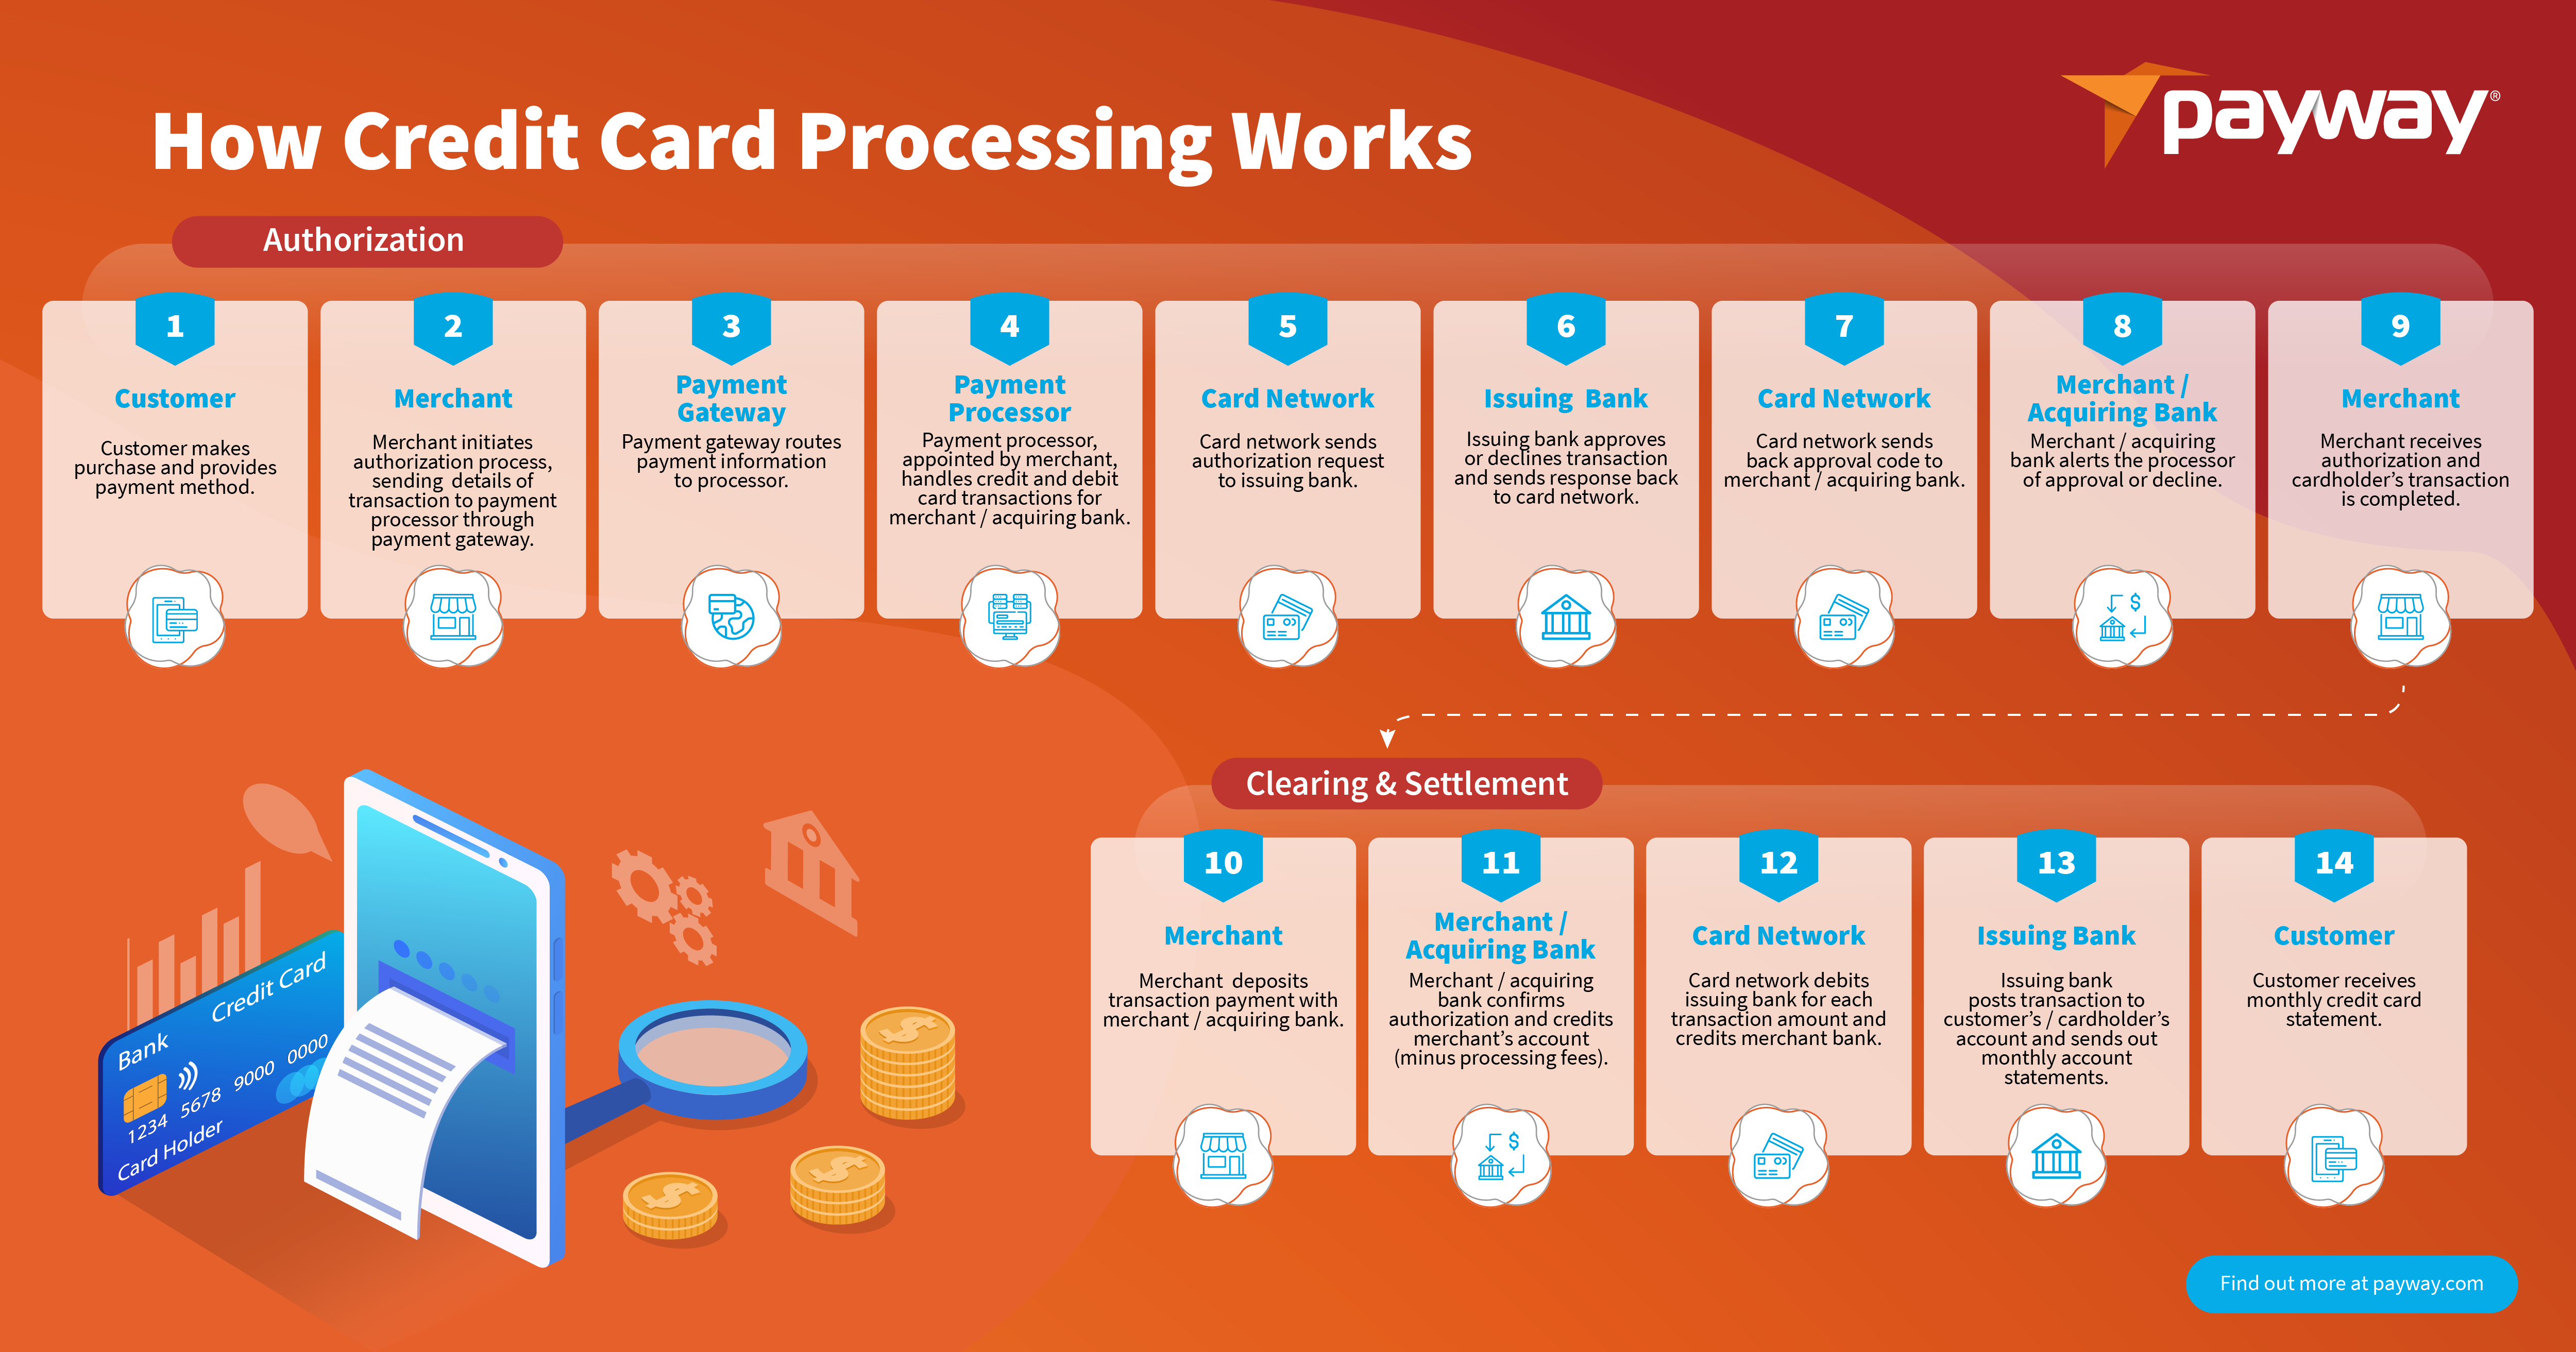 How Credit Card Processing Works "Infographic" Payway